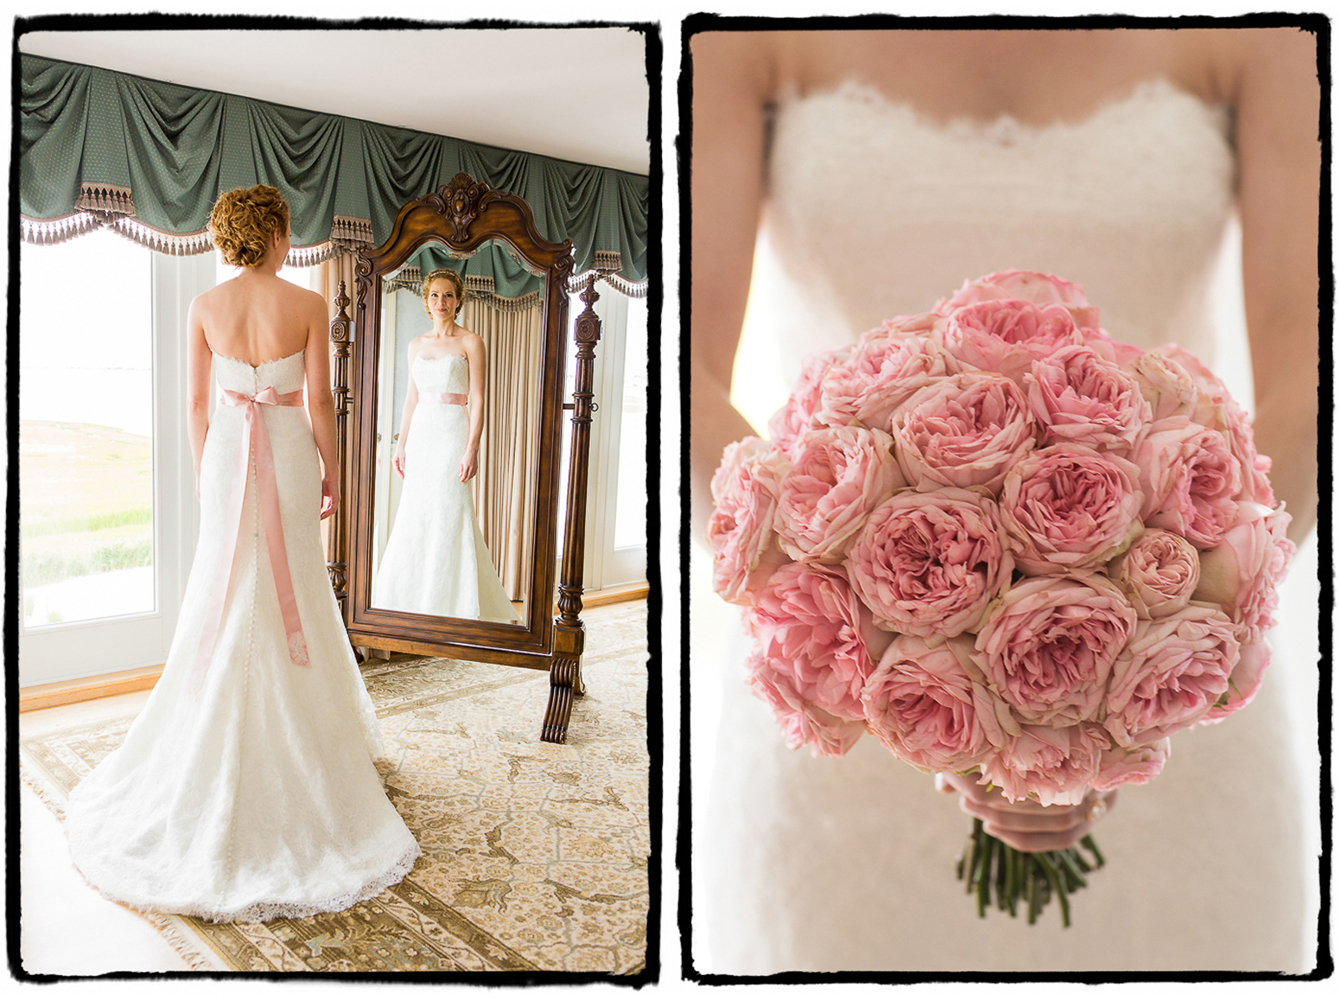 Kelly's pink sash matched her lovely bouquet at Bonnet Island Estate.